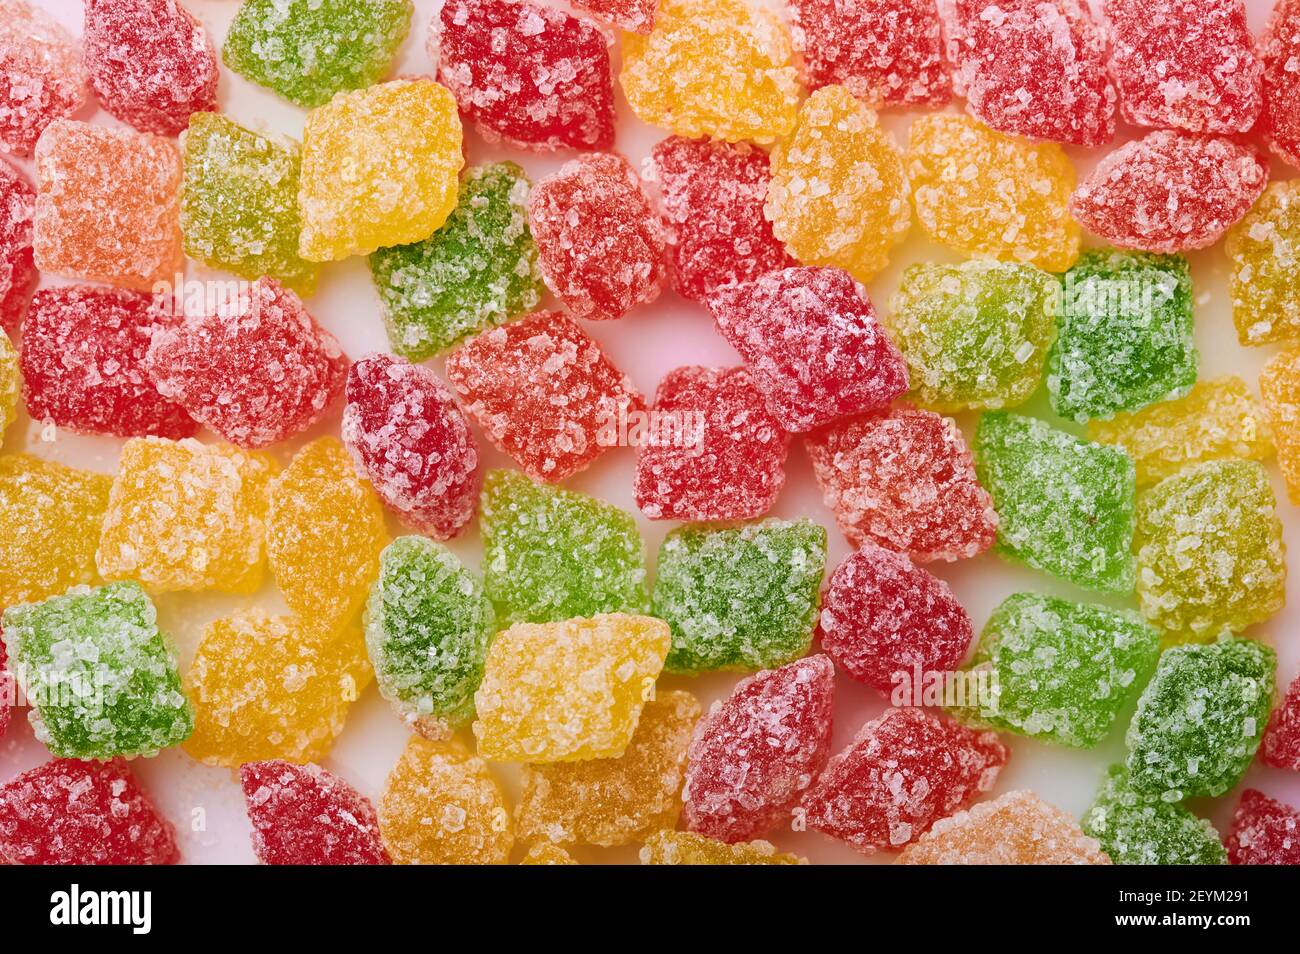 Red and yellow candy background macro close up view Stock Photo